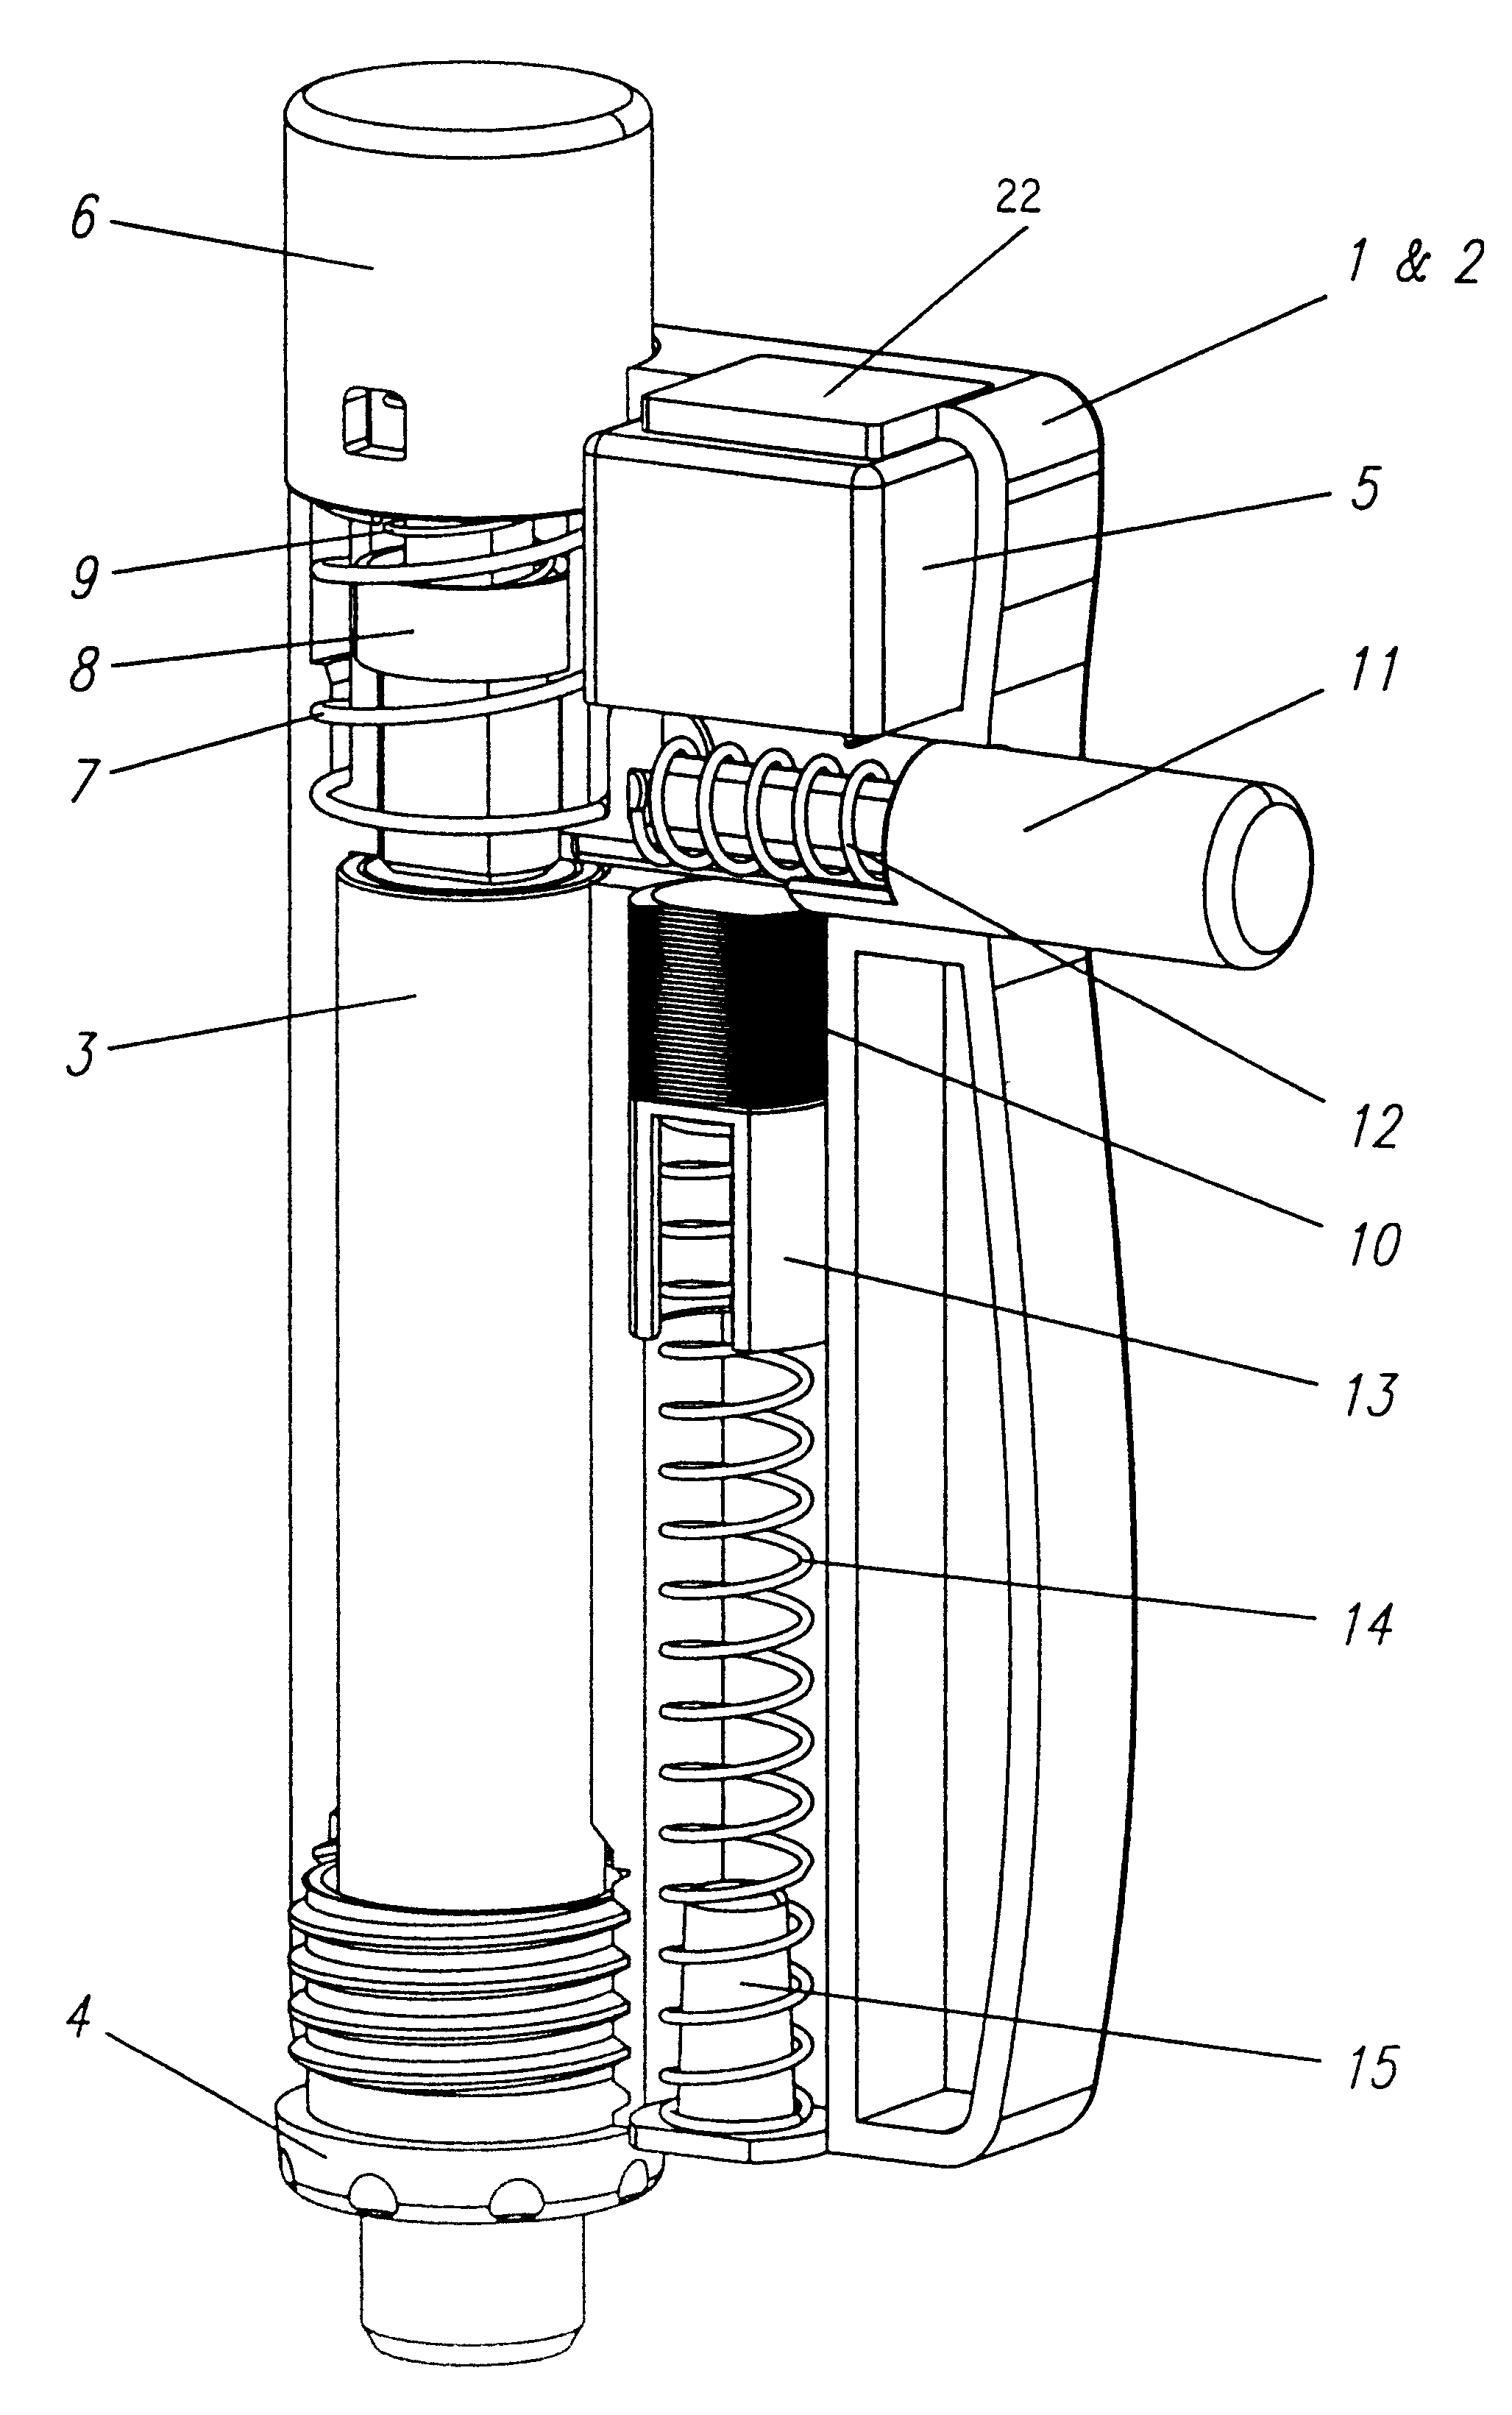 Device for administering an injectable product in doses